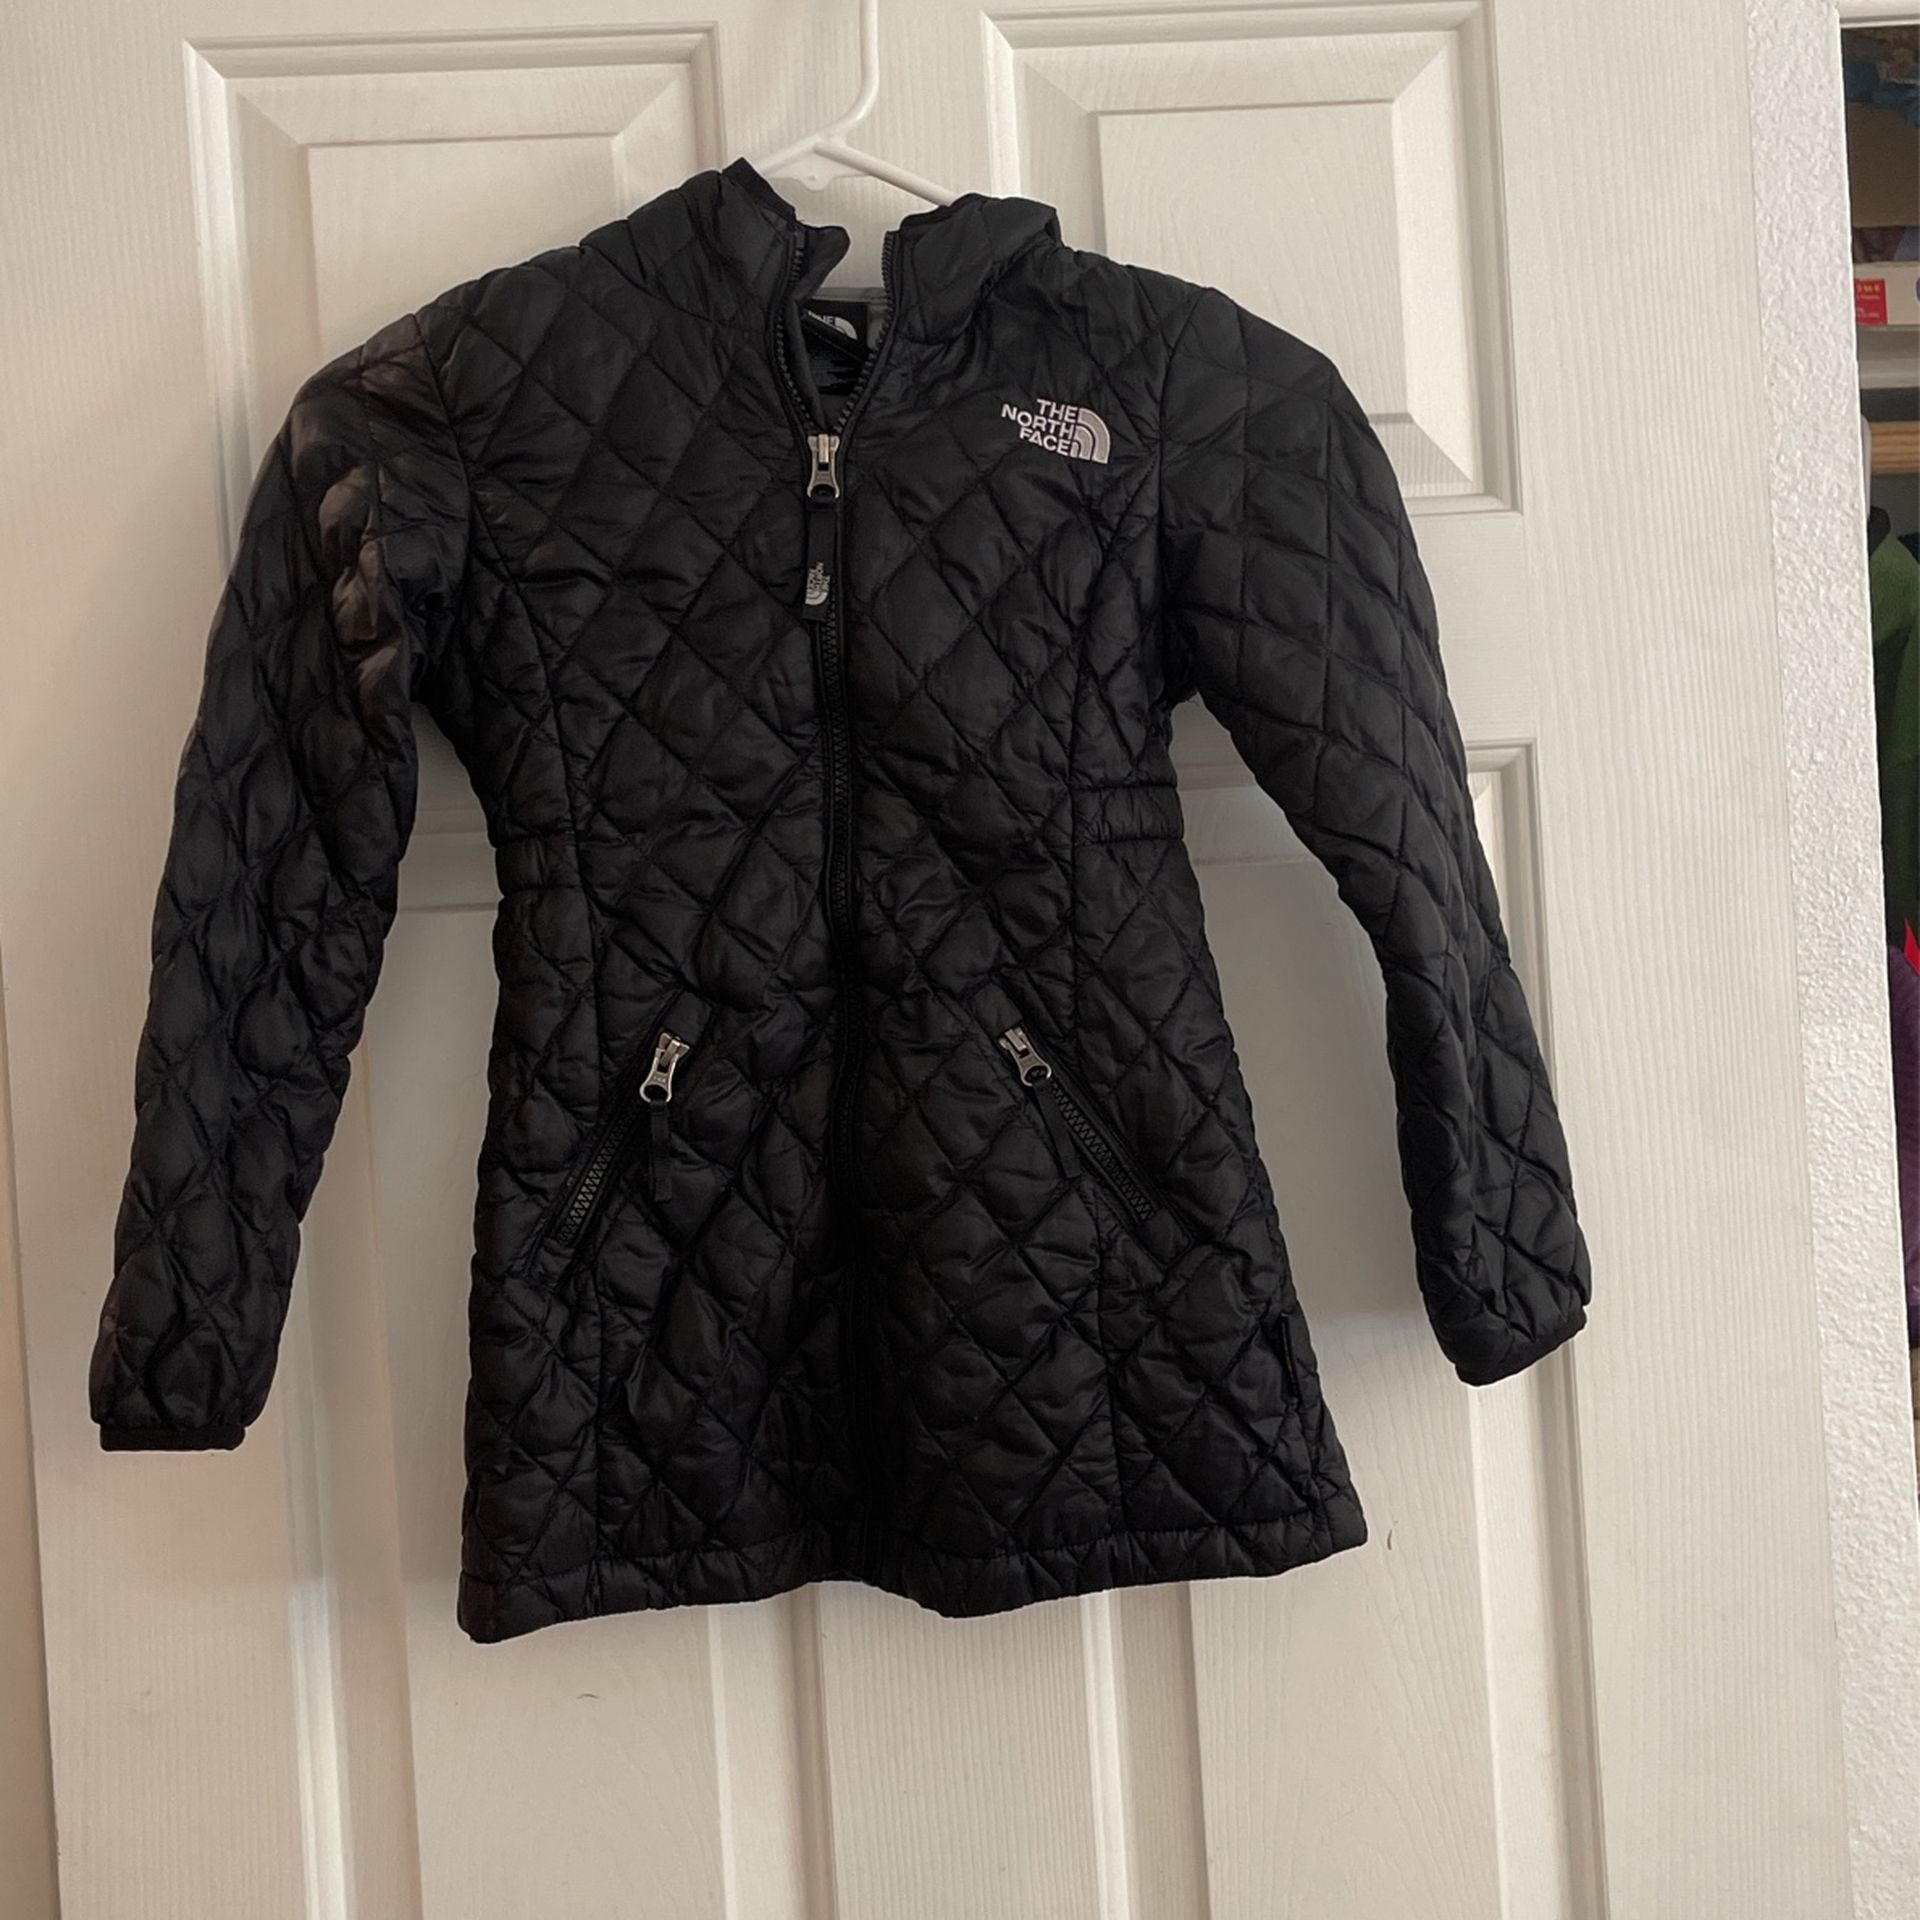 Girl Jacket The North Face Size 6